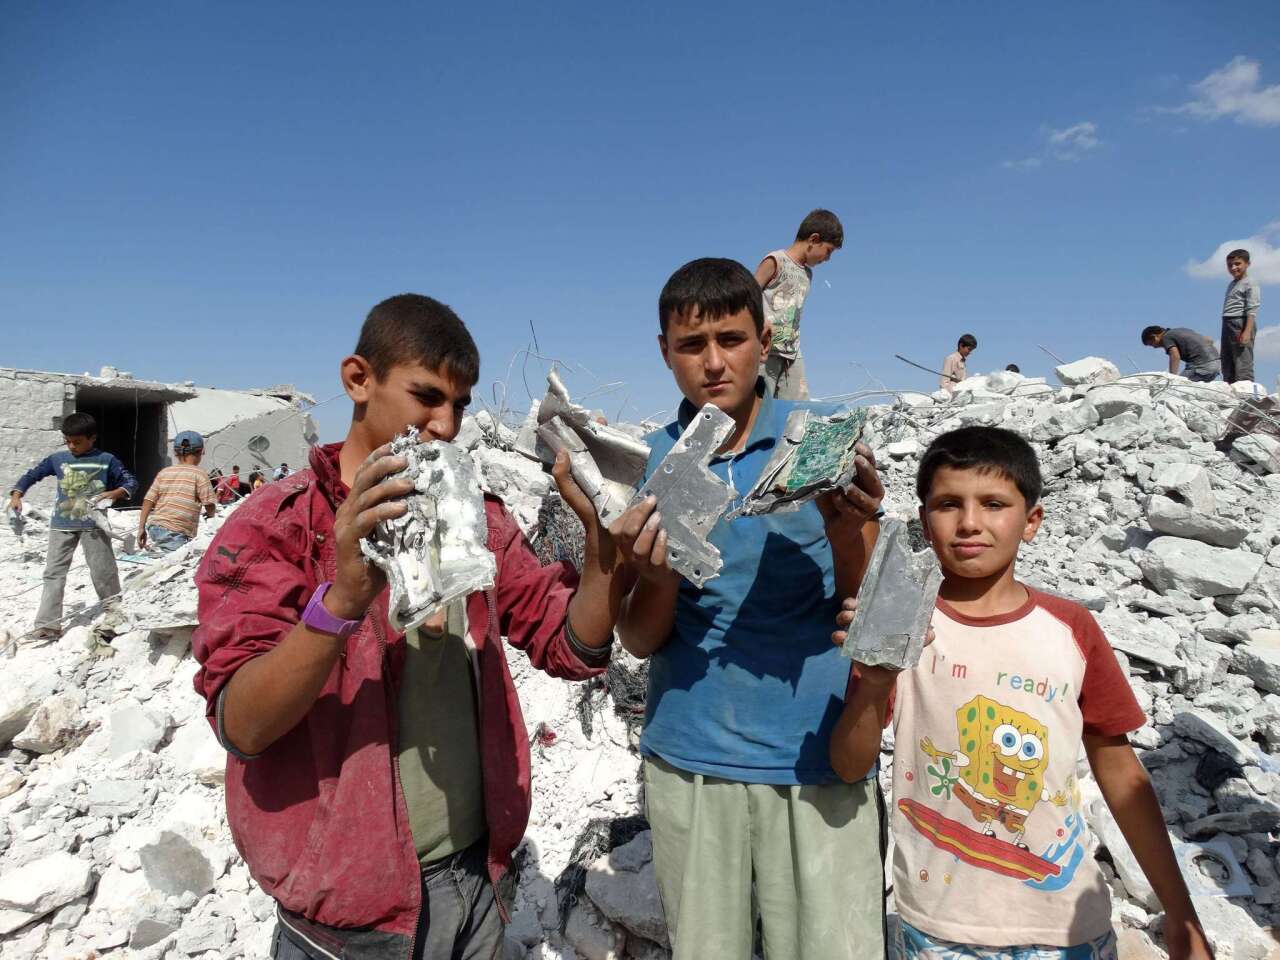 Syrian children hold up debris from a damaged house, reportedly hit by U.S.-led coalition airstrikes, in the village of Kfar Derian in the western Aleppo province.